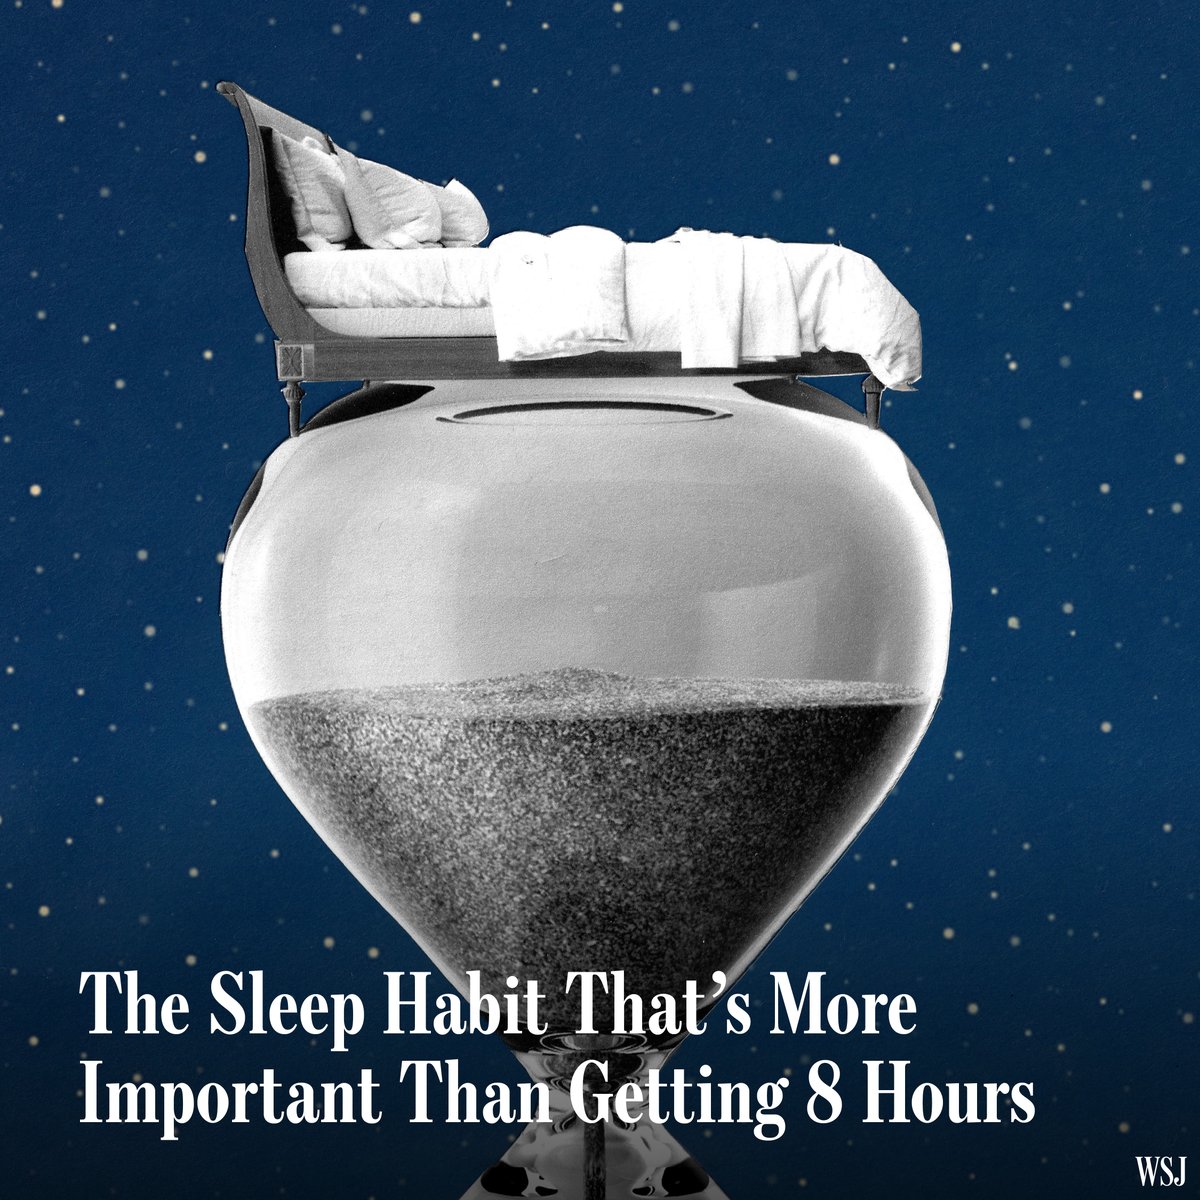 Can you sleep your way to a longer life? Scientists home in on the link between sleep and longevity 🔗on.wsj.com/3yFmzUU